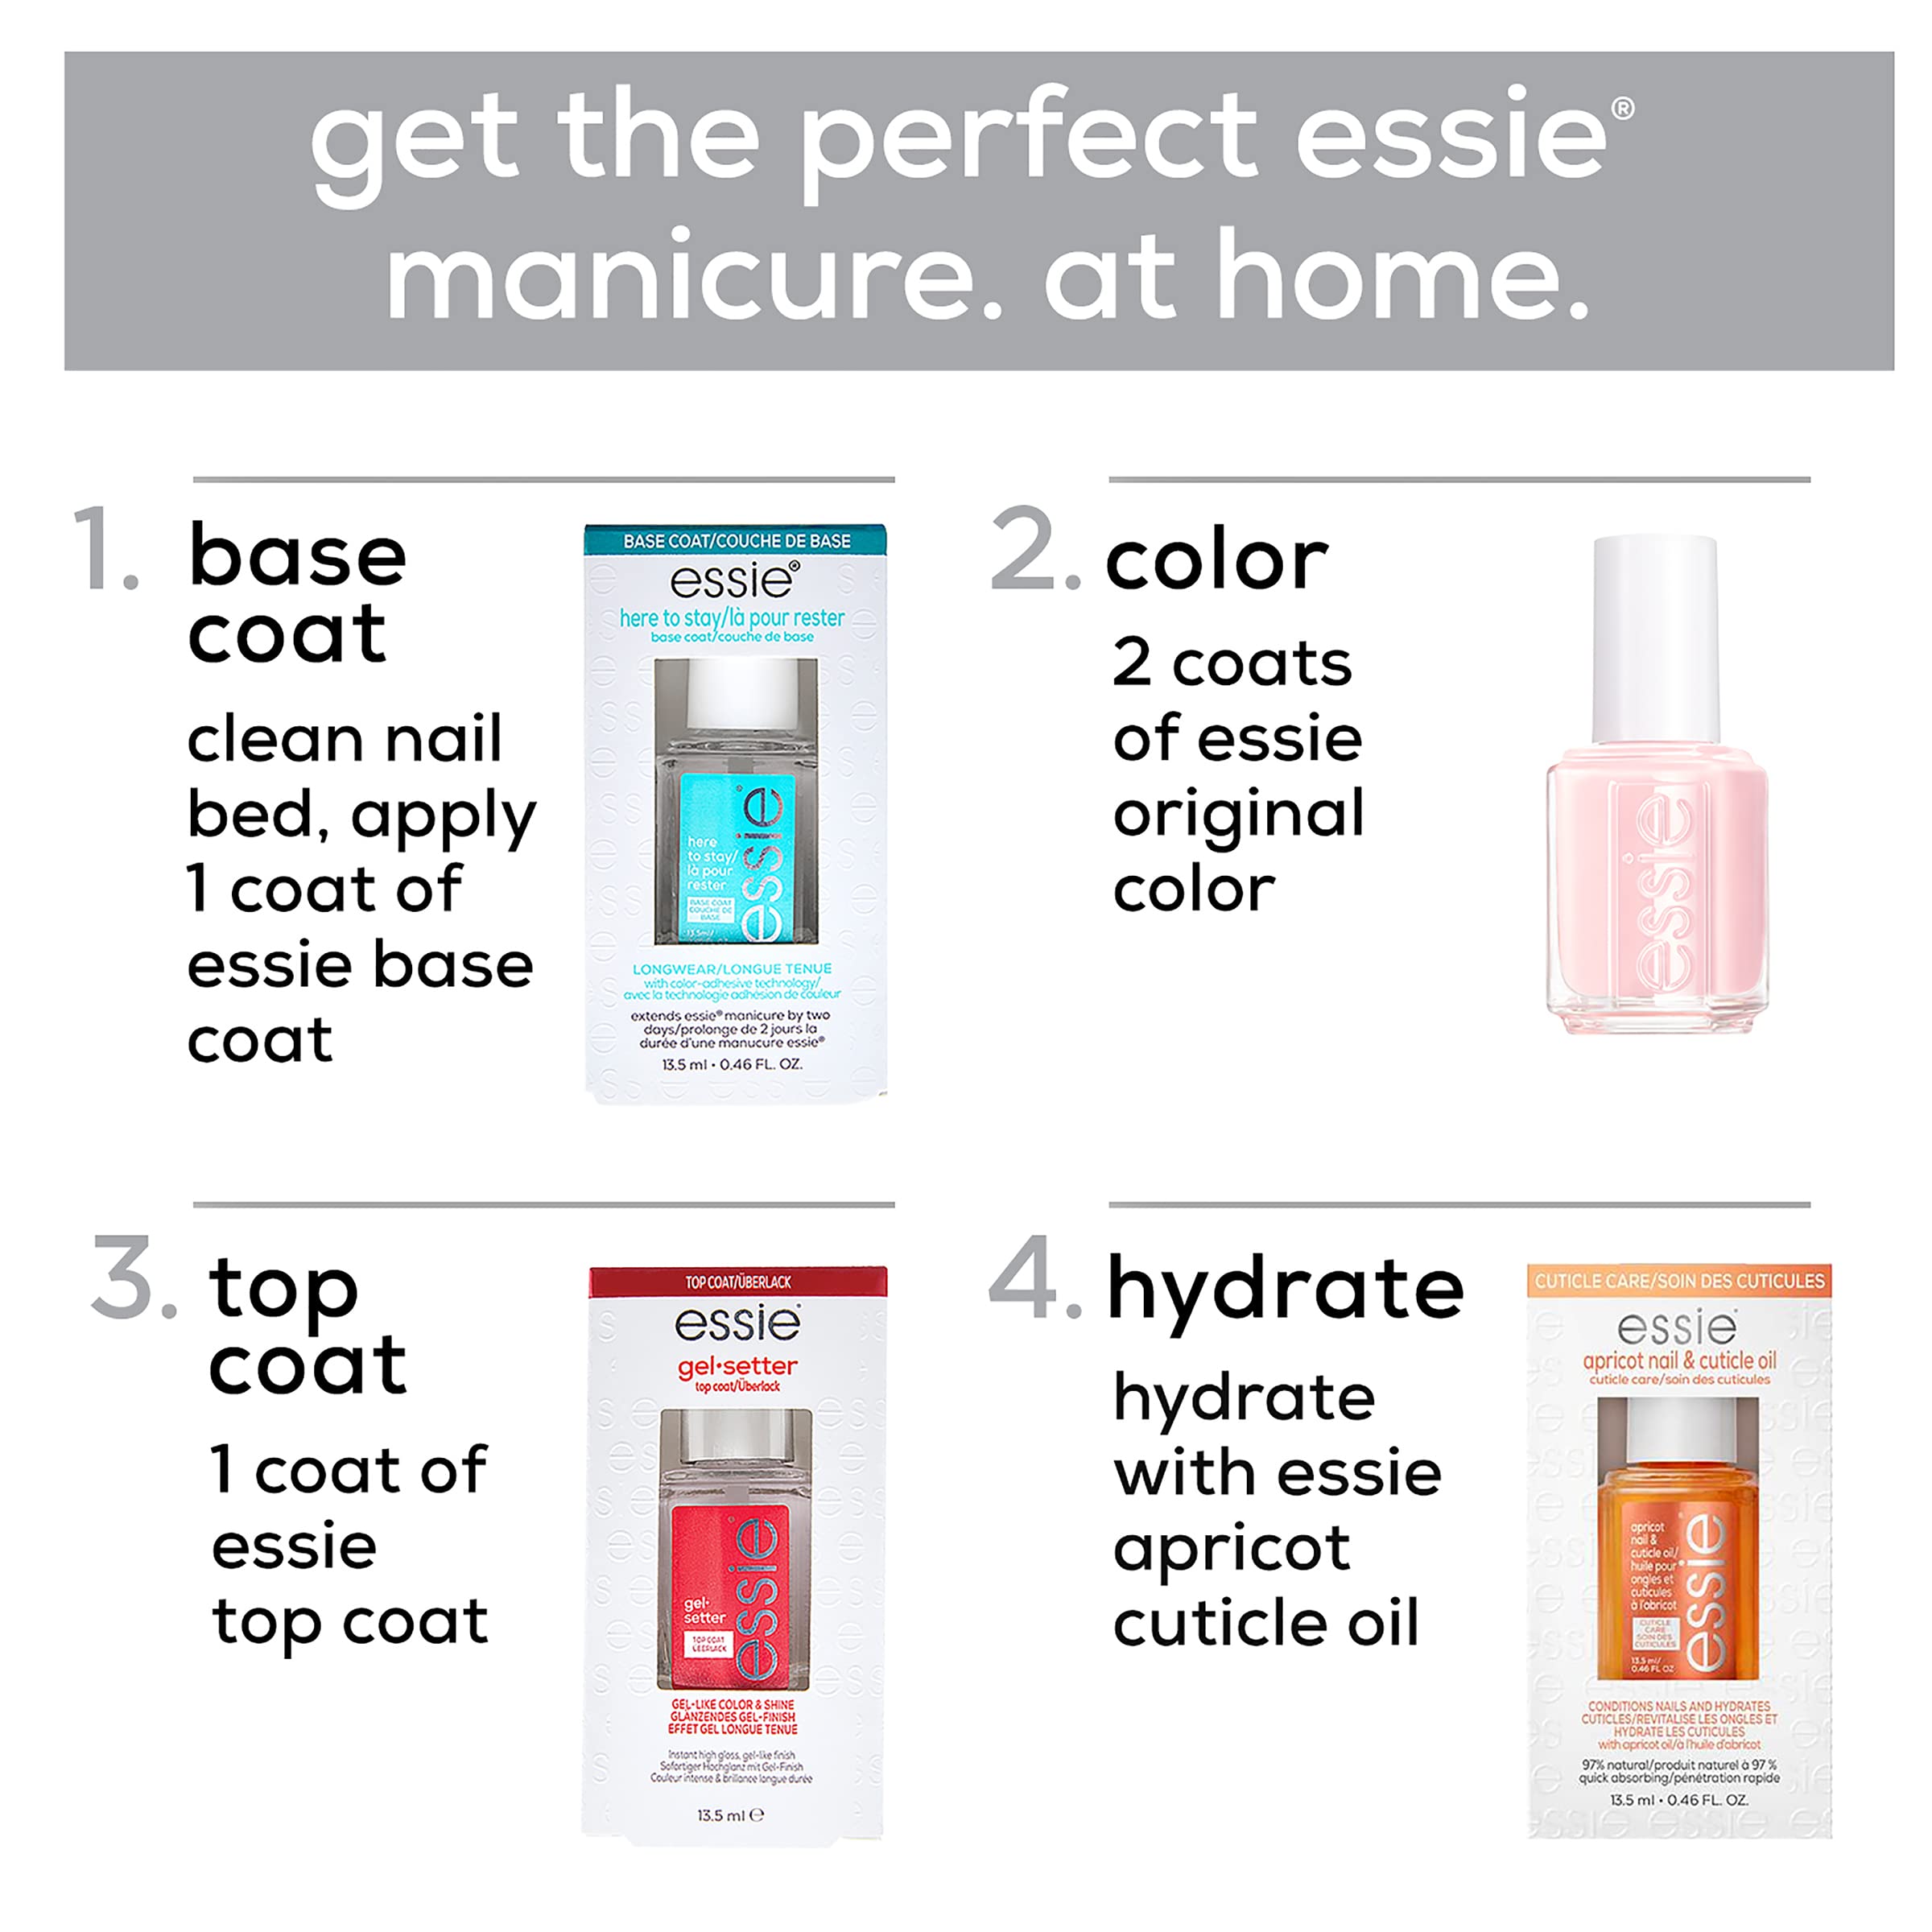 essie Nail Care, 8-Free Vegan, Apricot Nail and Cuticle Oil, softened and nourished cuticles, 0.46 fl oz